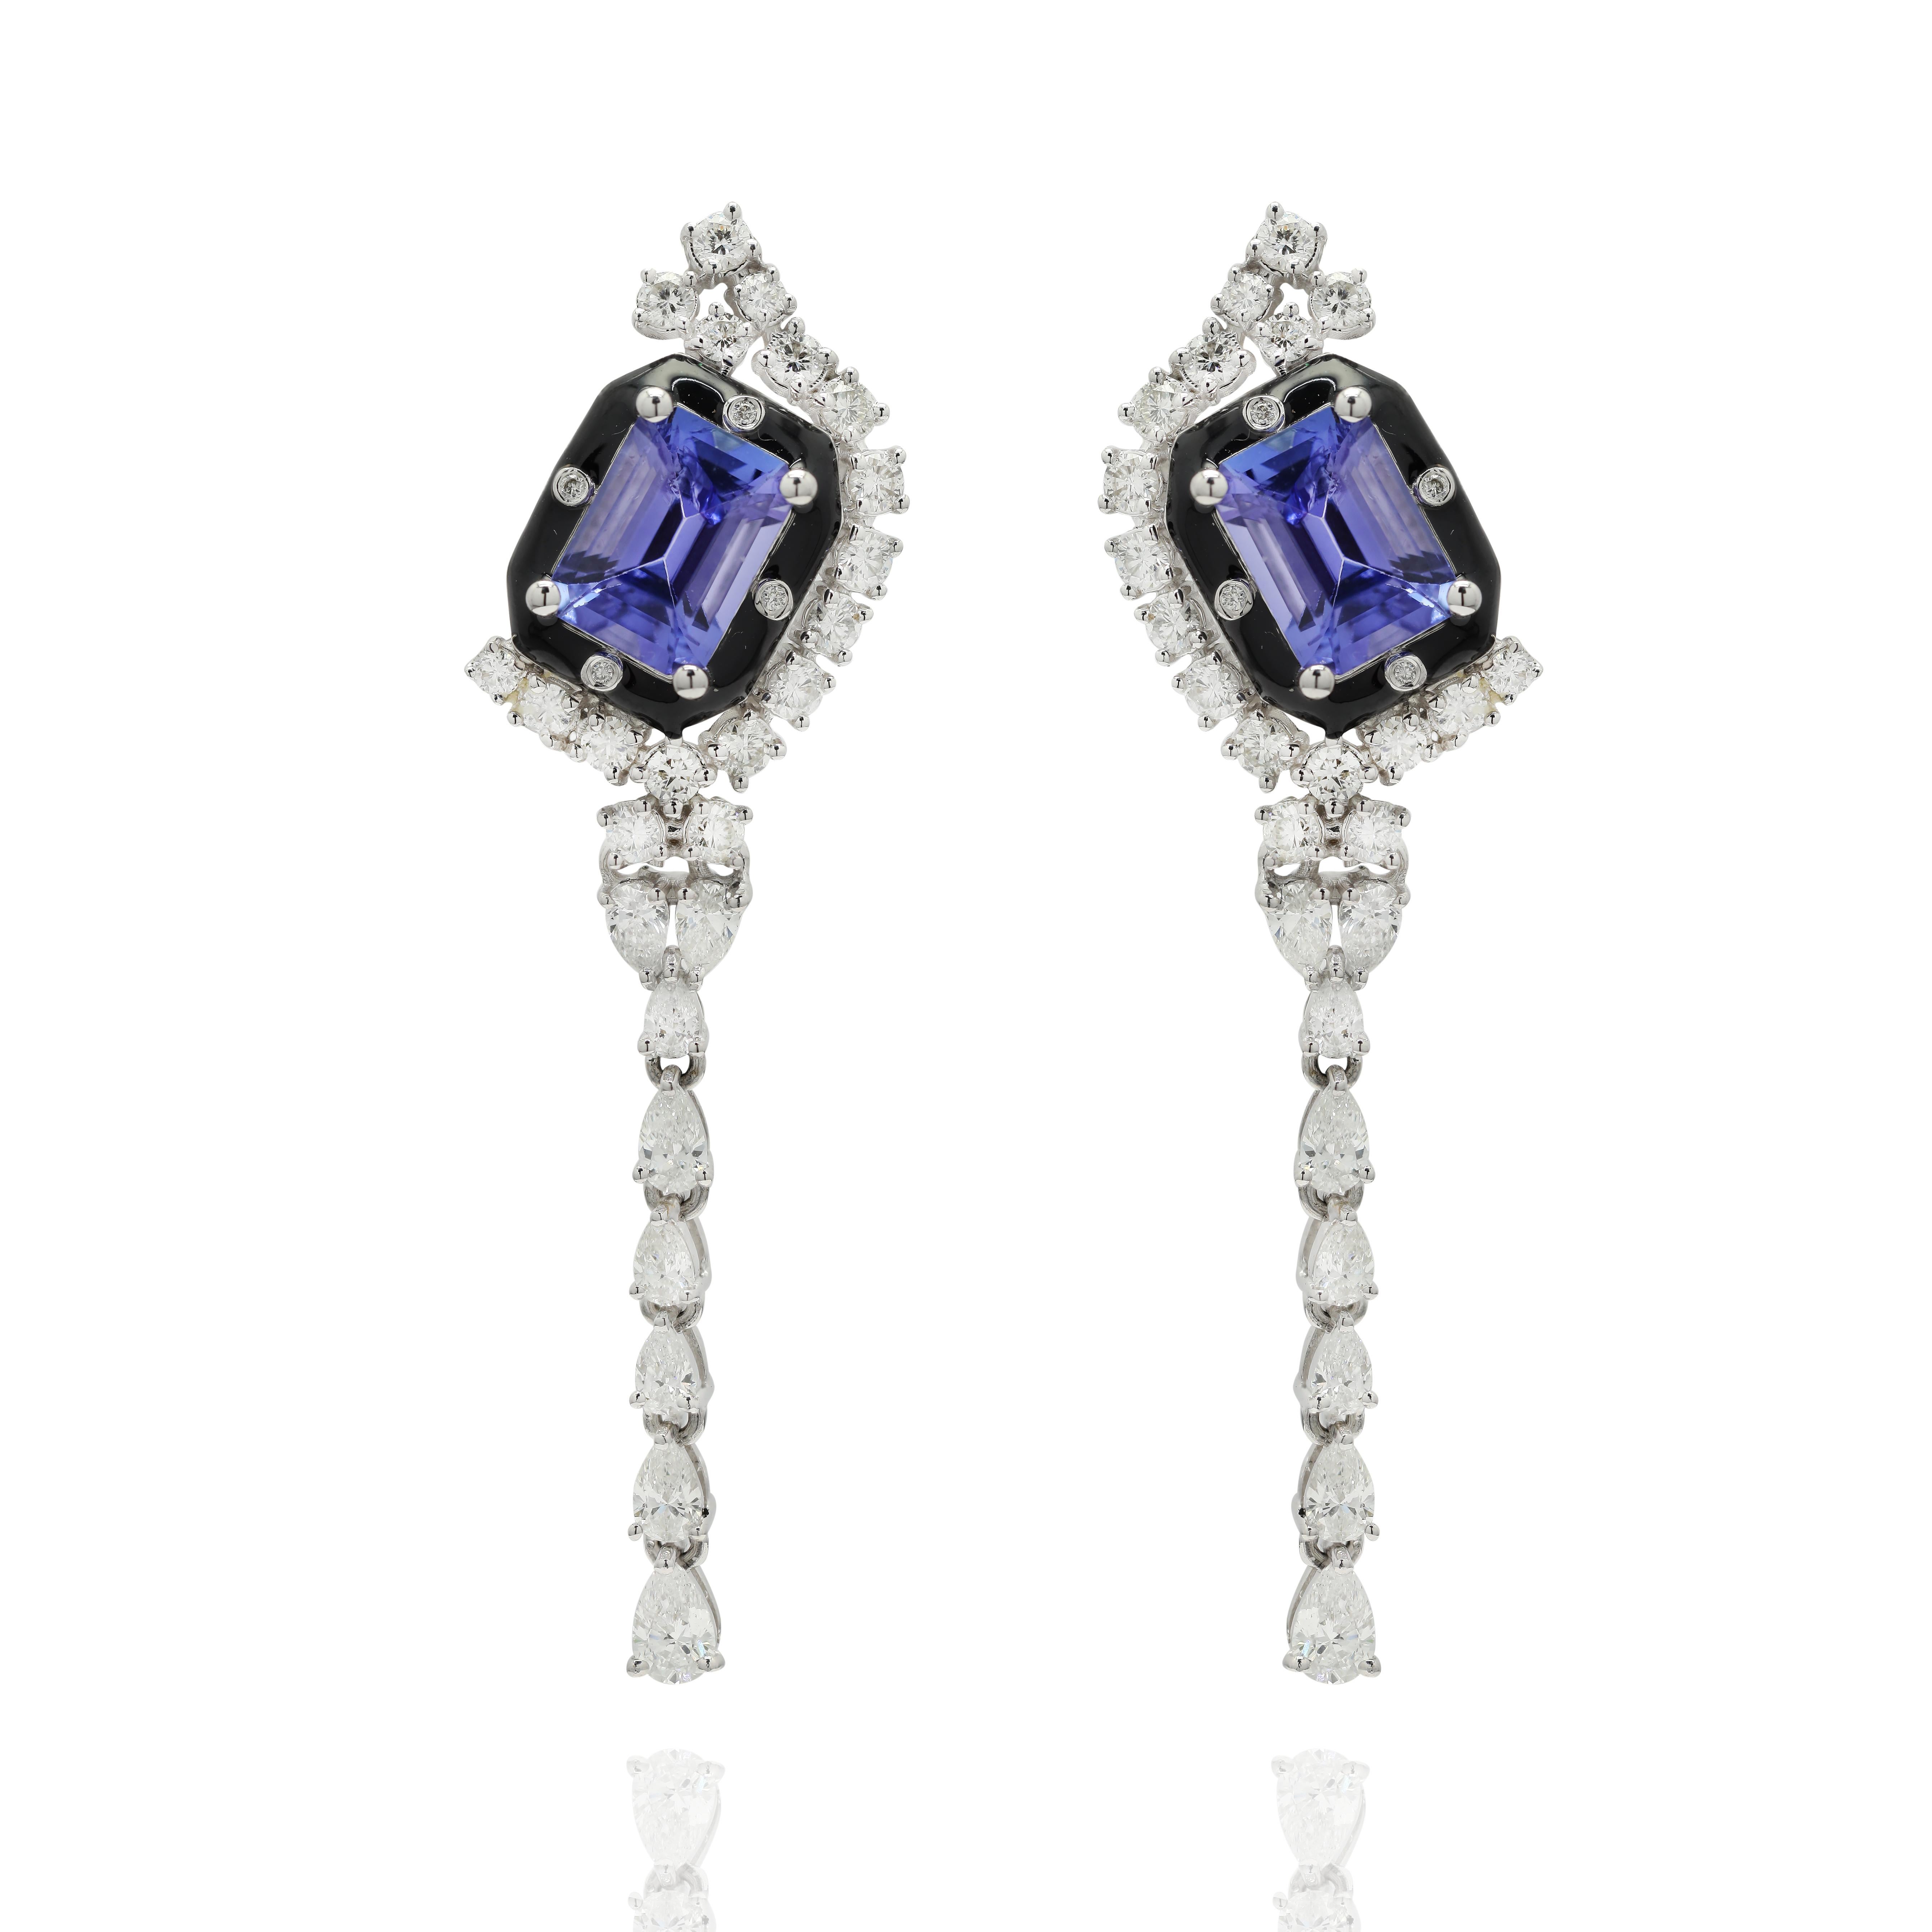 Tanzanite and Diamond Dangle Cocktail Earrings to make a statement with your look. These earrings create a sparkling, luxurious look featuring octagon cut gemstone.
If you love to gravitate towards unique styles, this piece of jewelry is perfect for